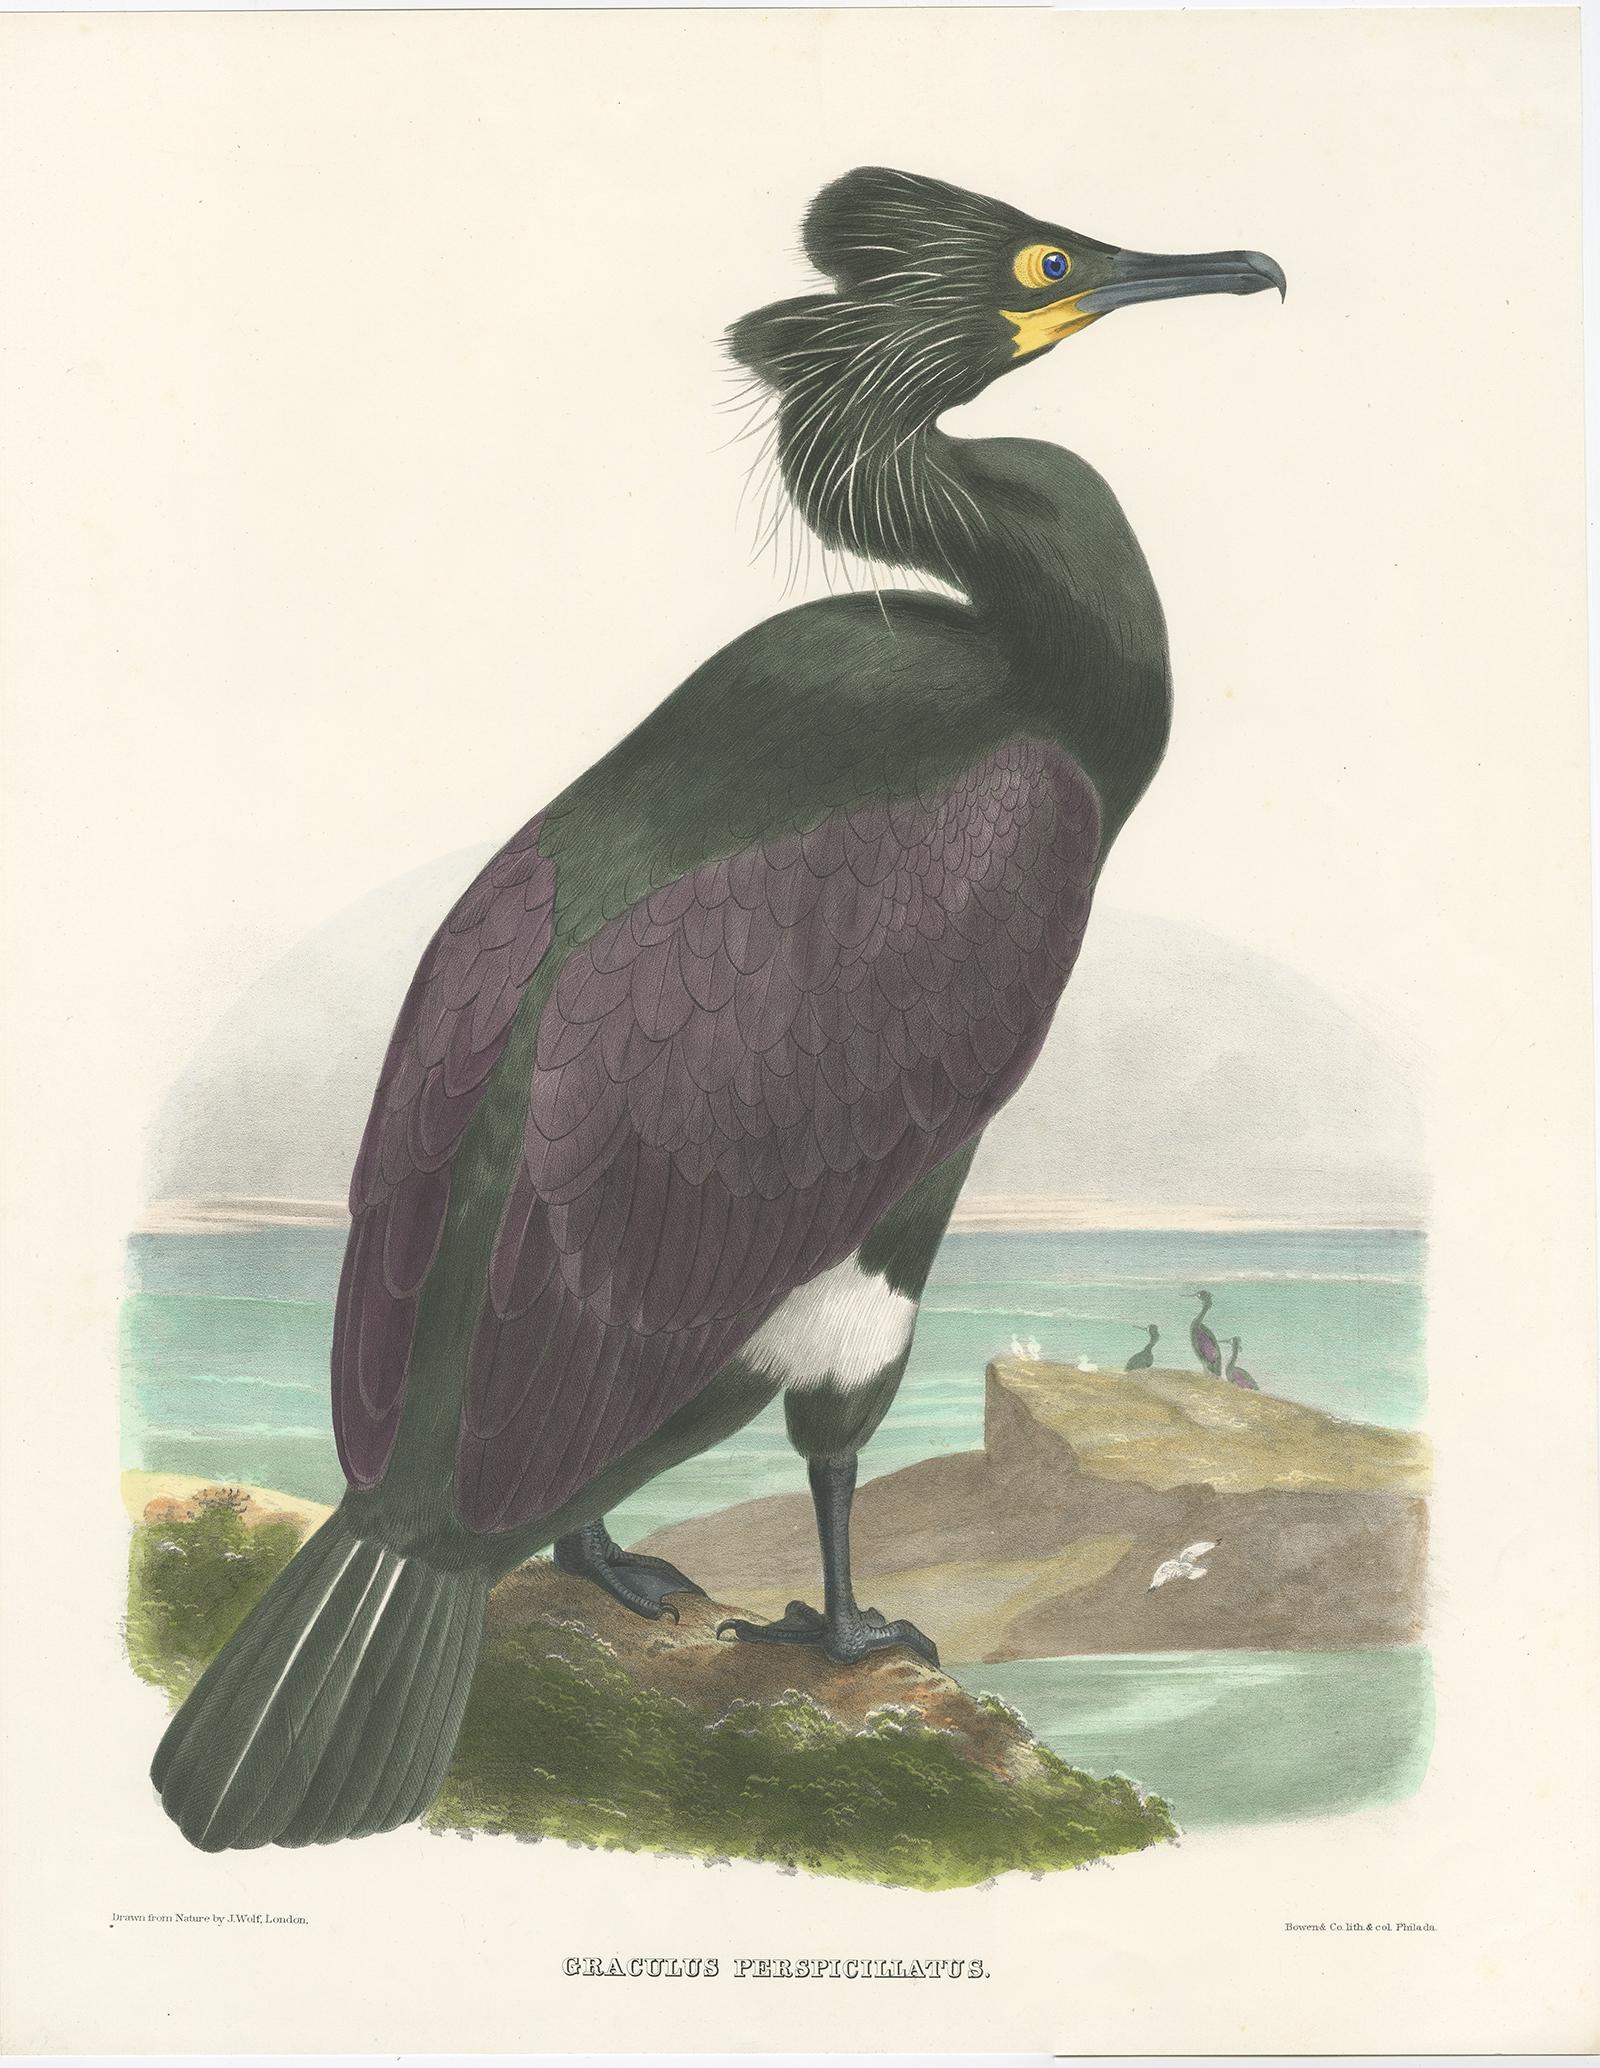 Antique bird print titled 'Graculus Perspicillatus'. 

Old bird print depicting the Spectacled Cormorant. This print originates from 'The new and heretofore unfigured species of the birds of North America', published 1866-1869.

This spectacular